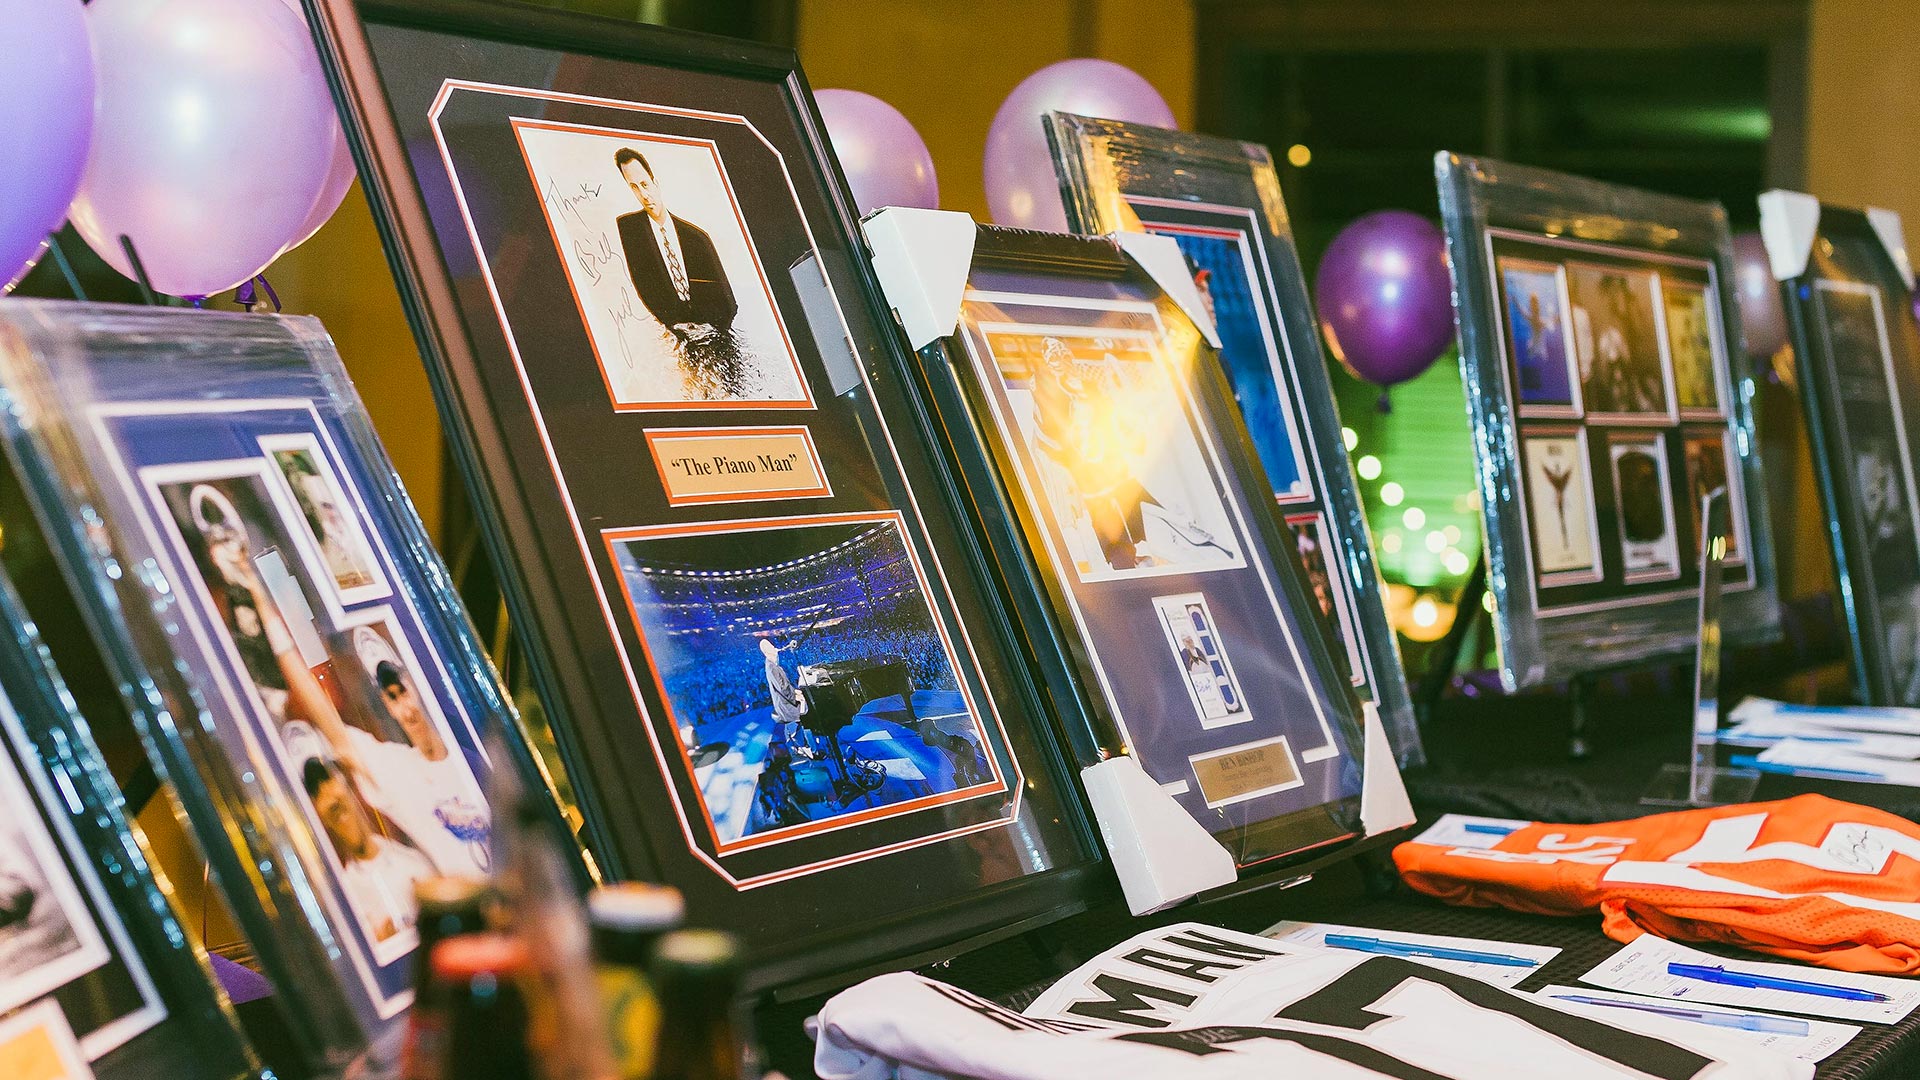 Auction items at an event run by SociallyFunded